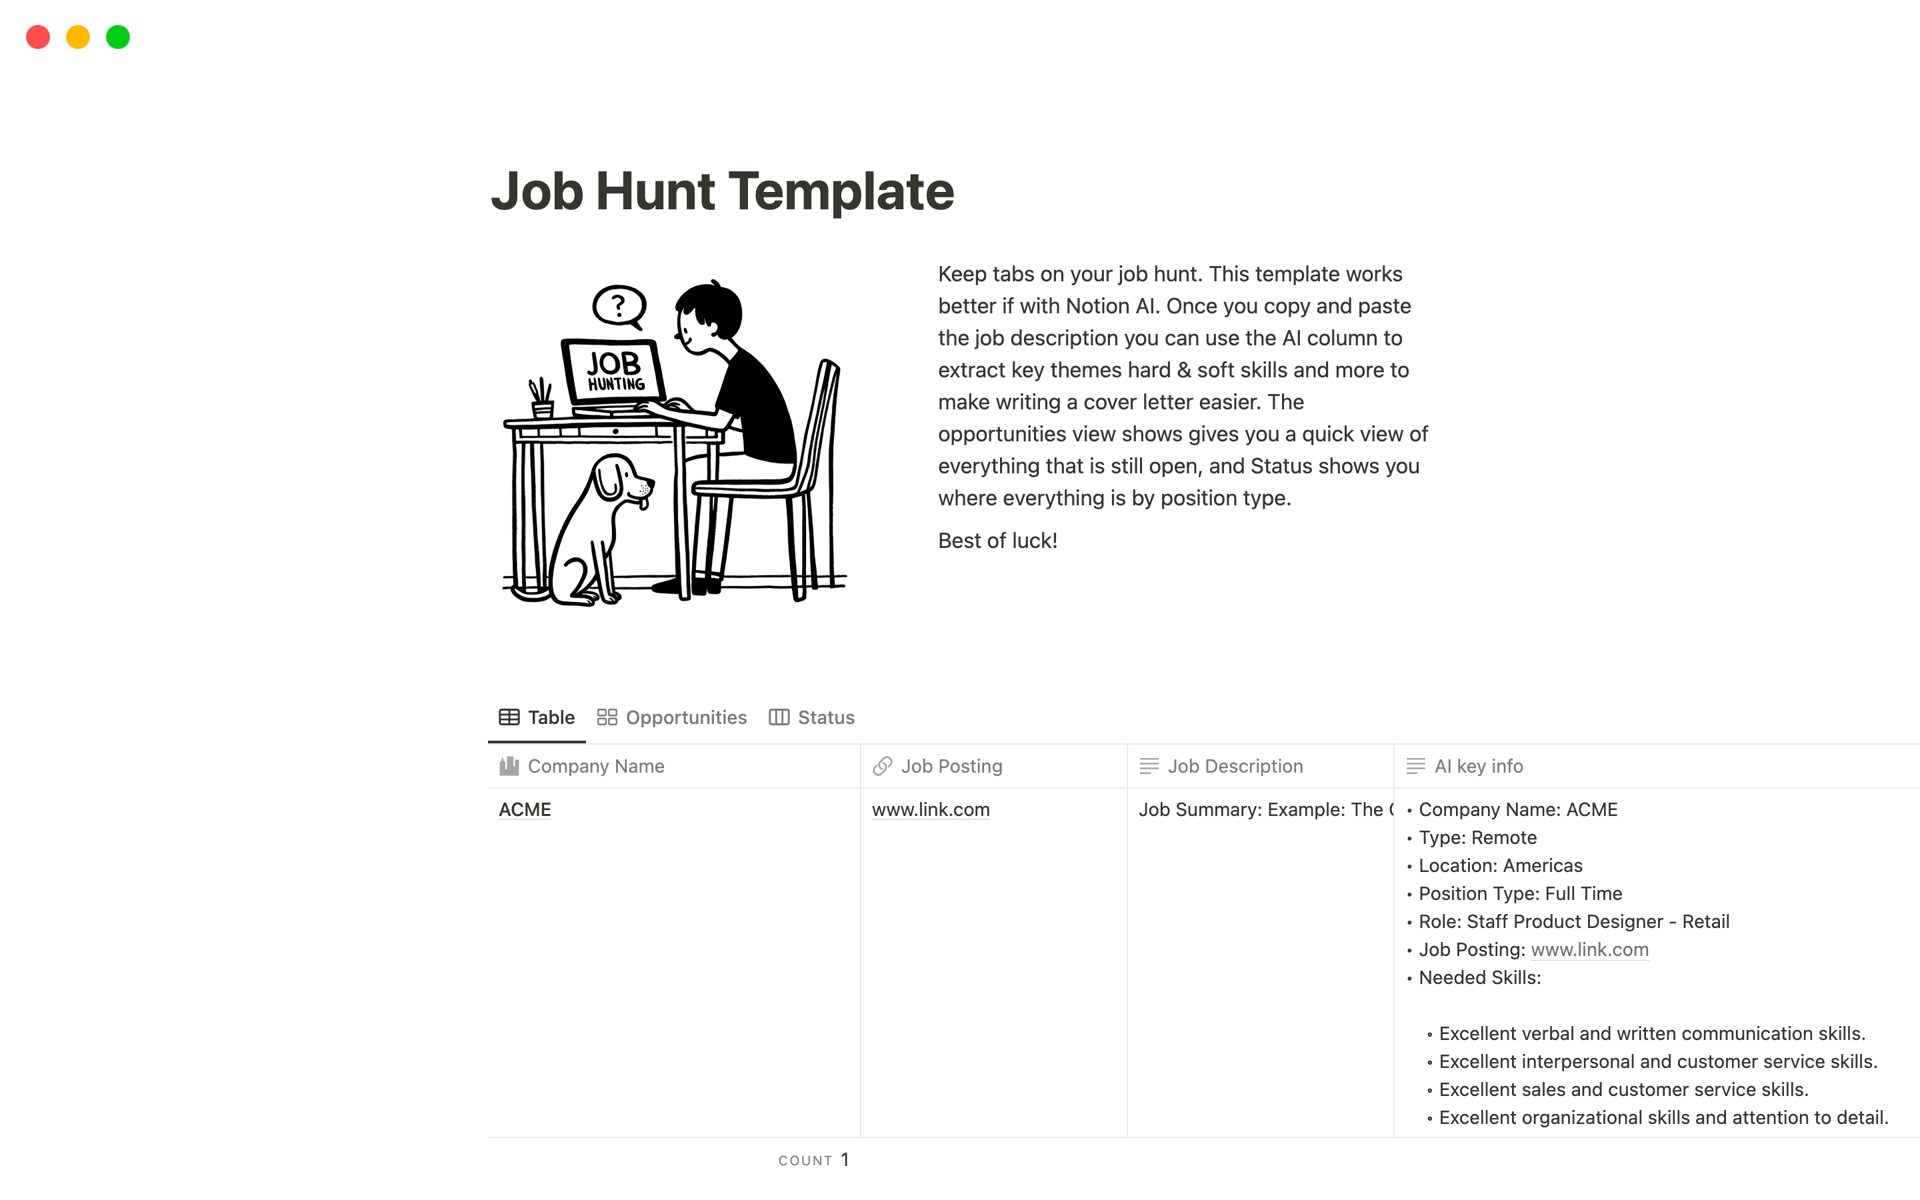 A template preview for Job Hunt